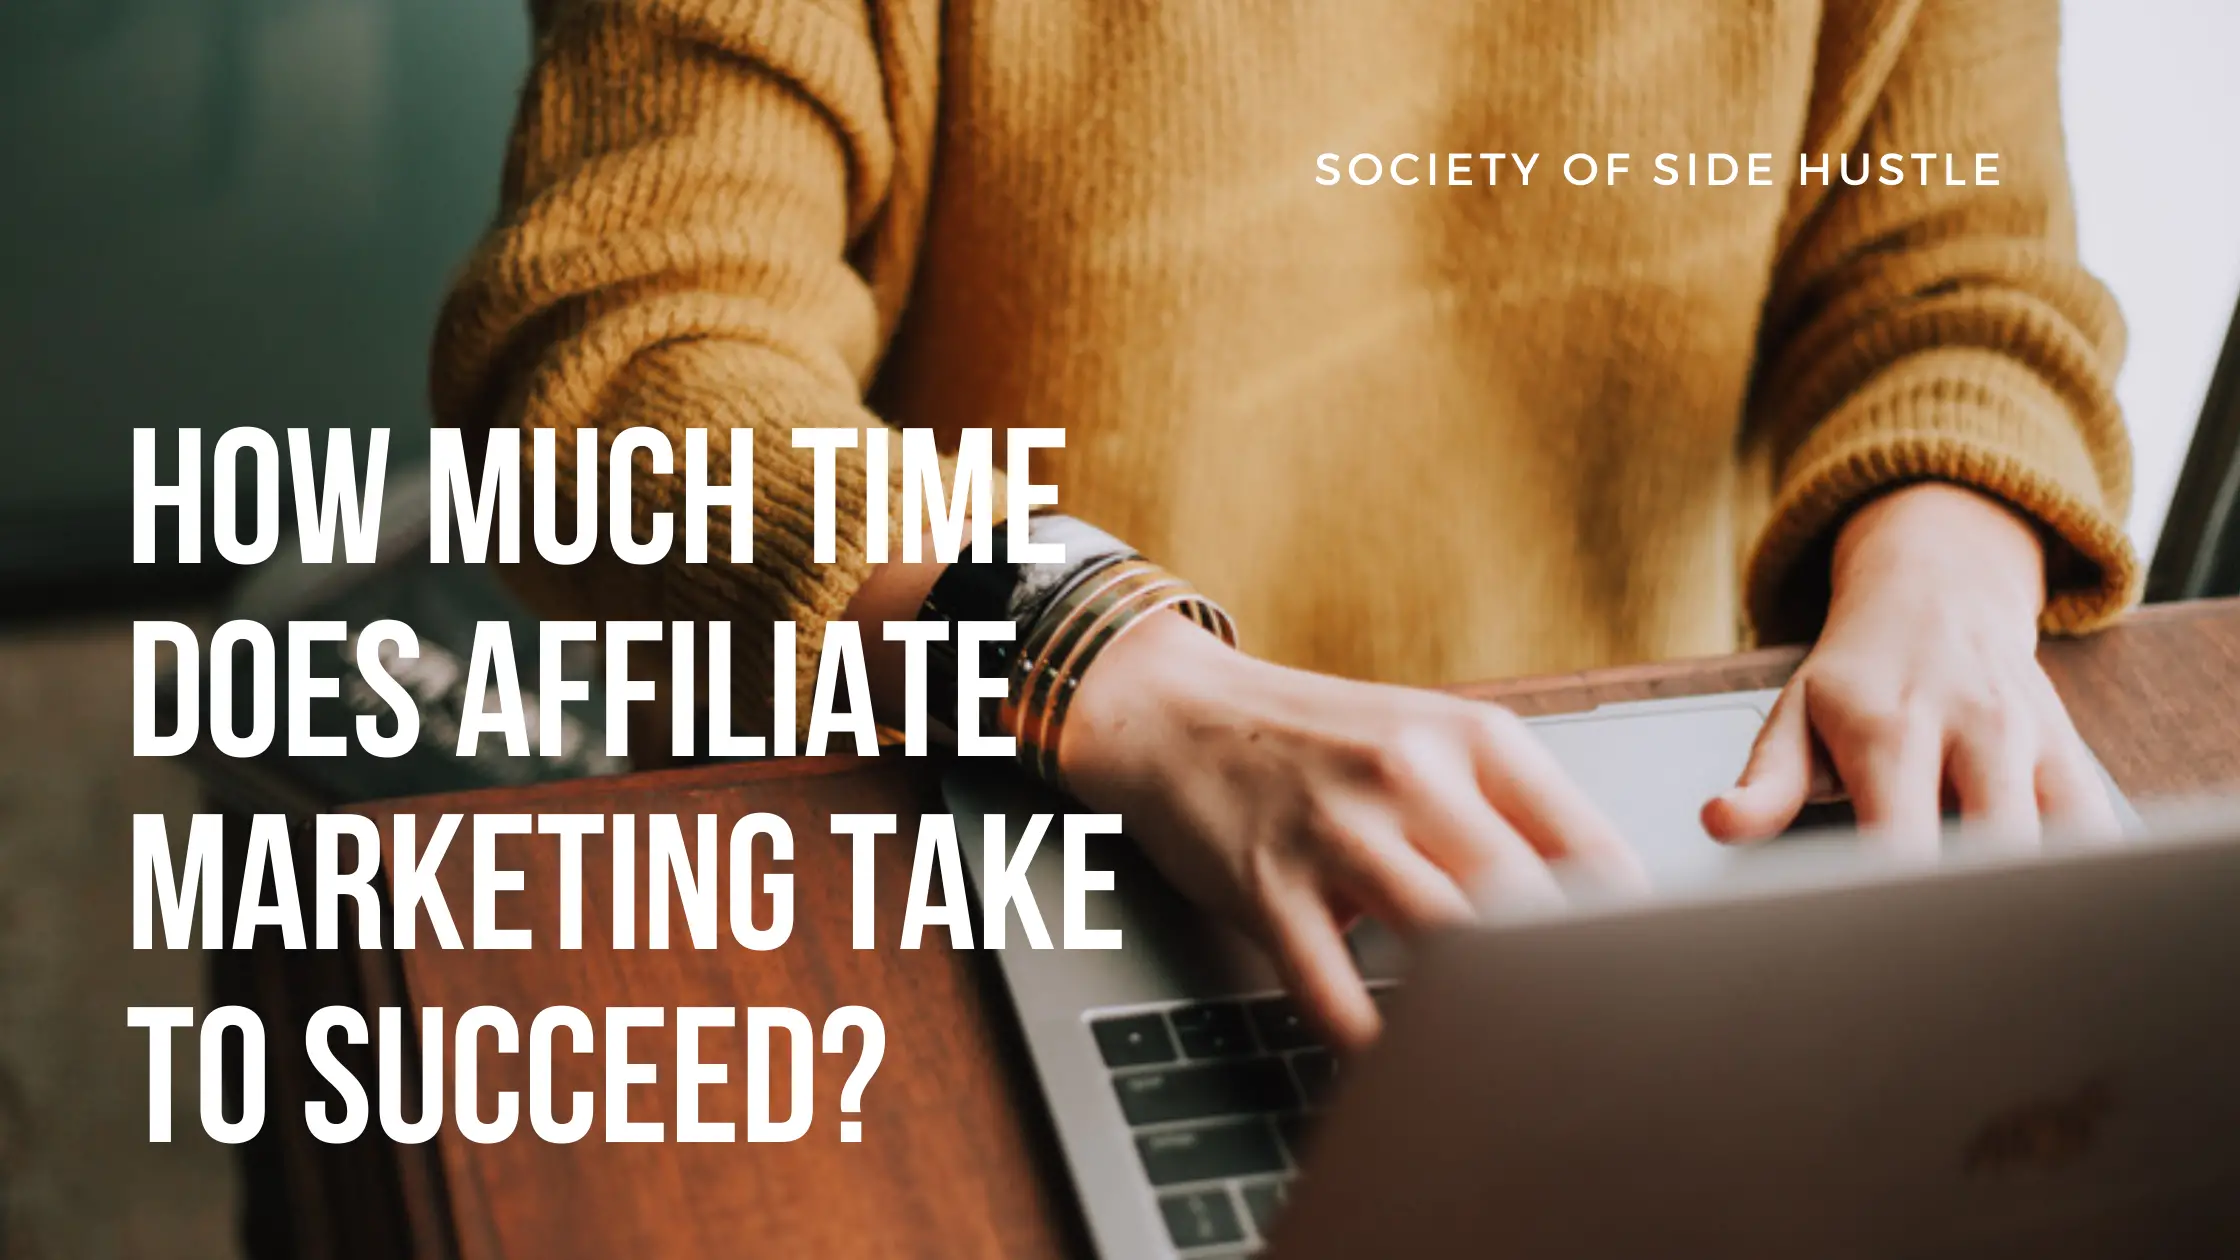 How Much Time Does Affiliate Marketing Take to Succeed?